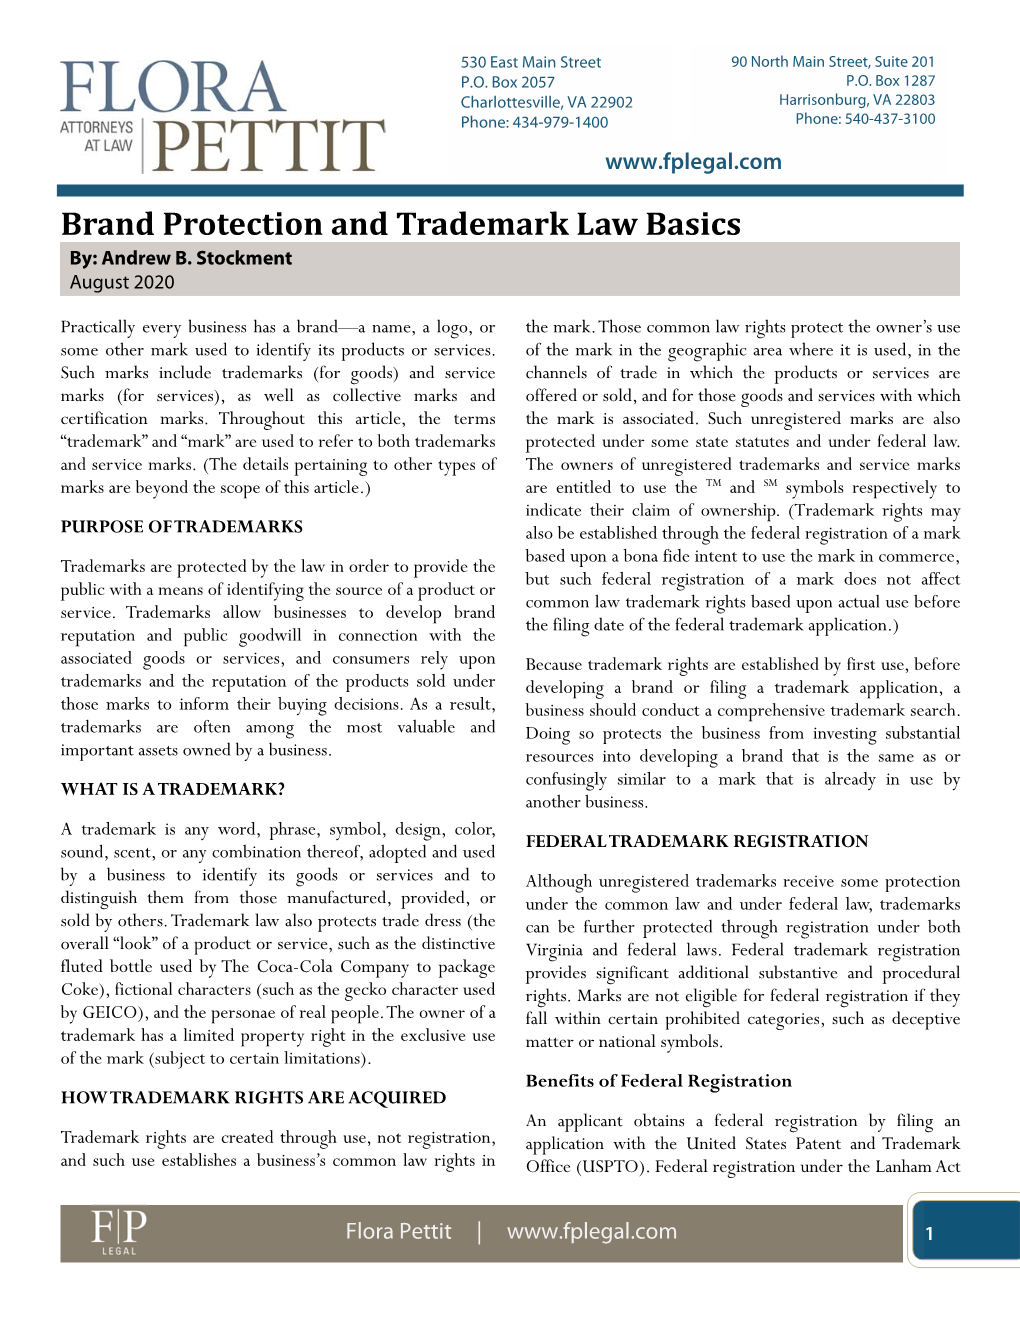 Brand Protection and Trademark Law Basics 1 File